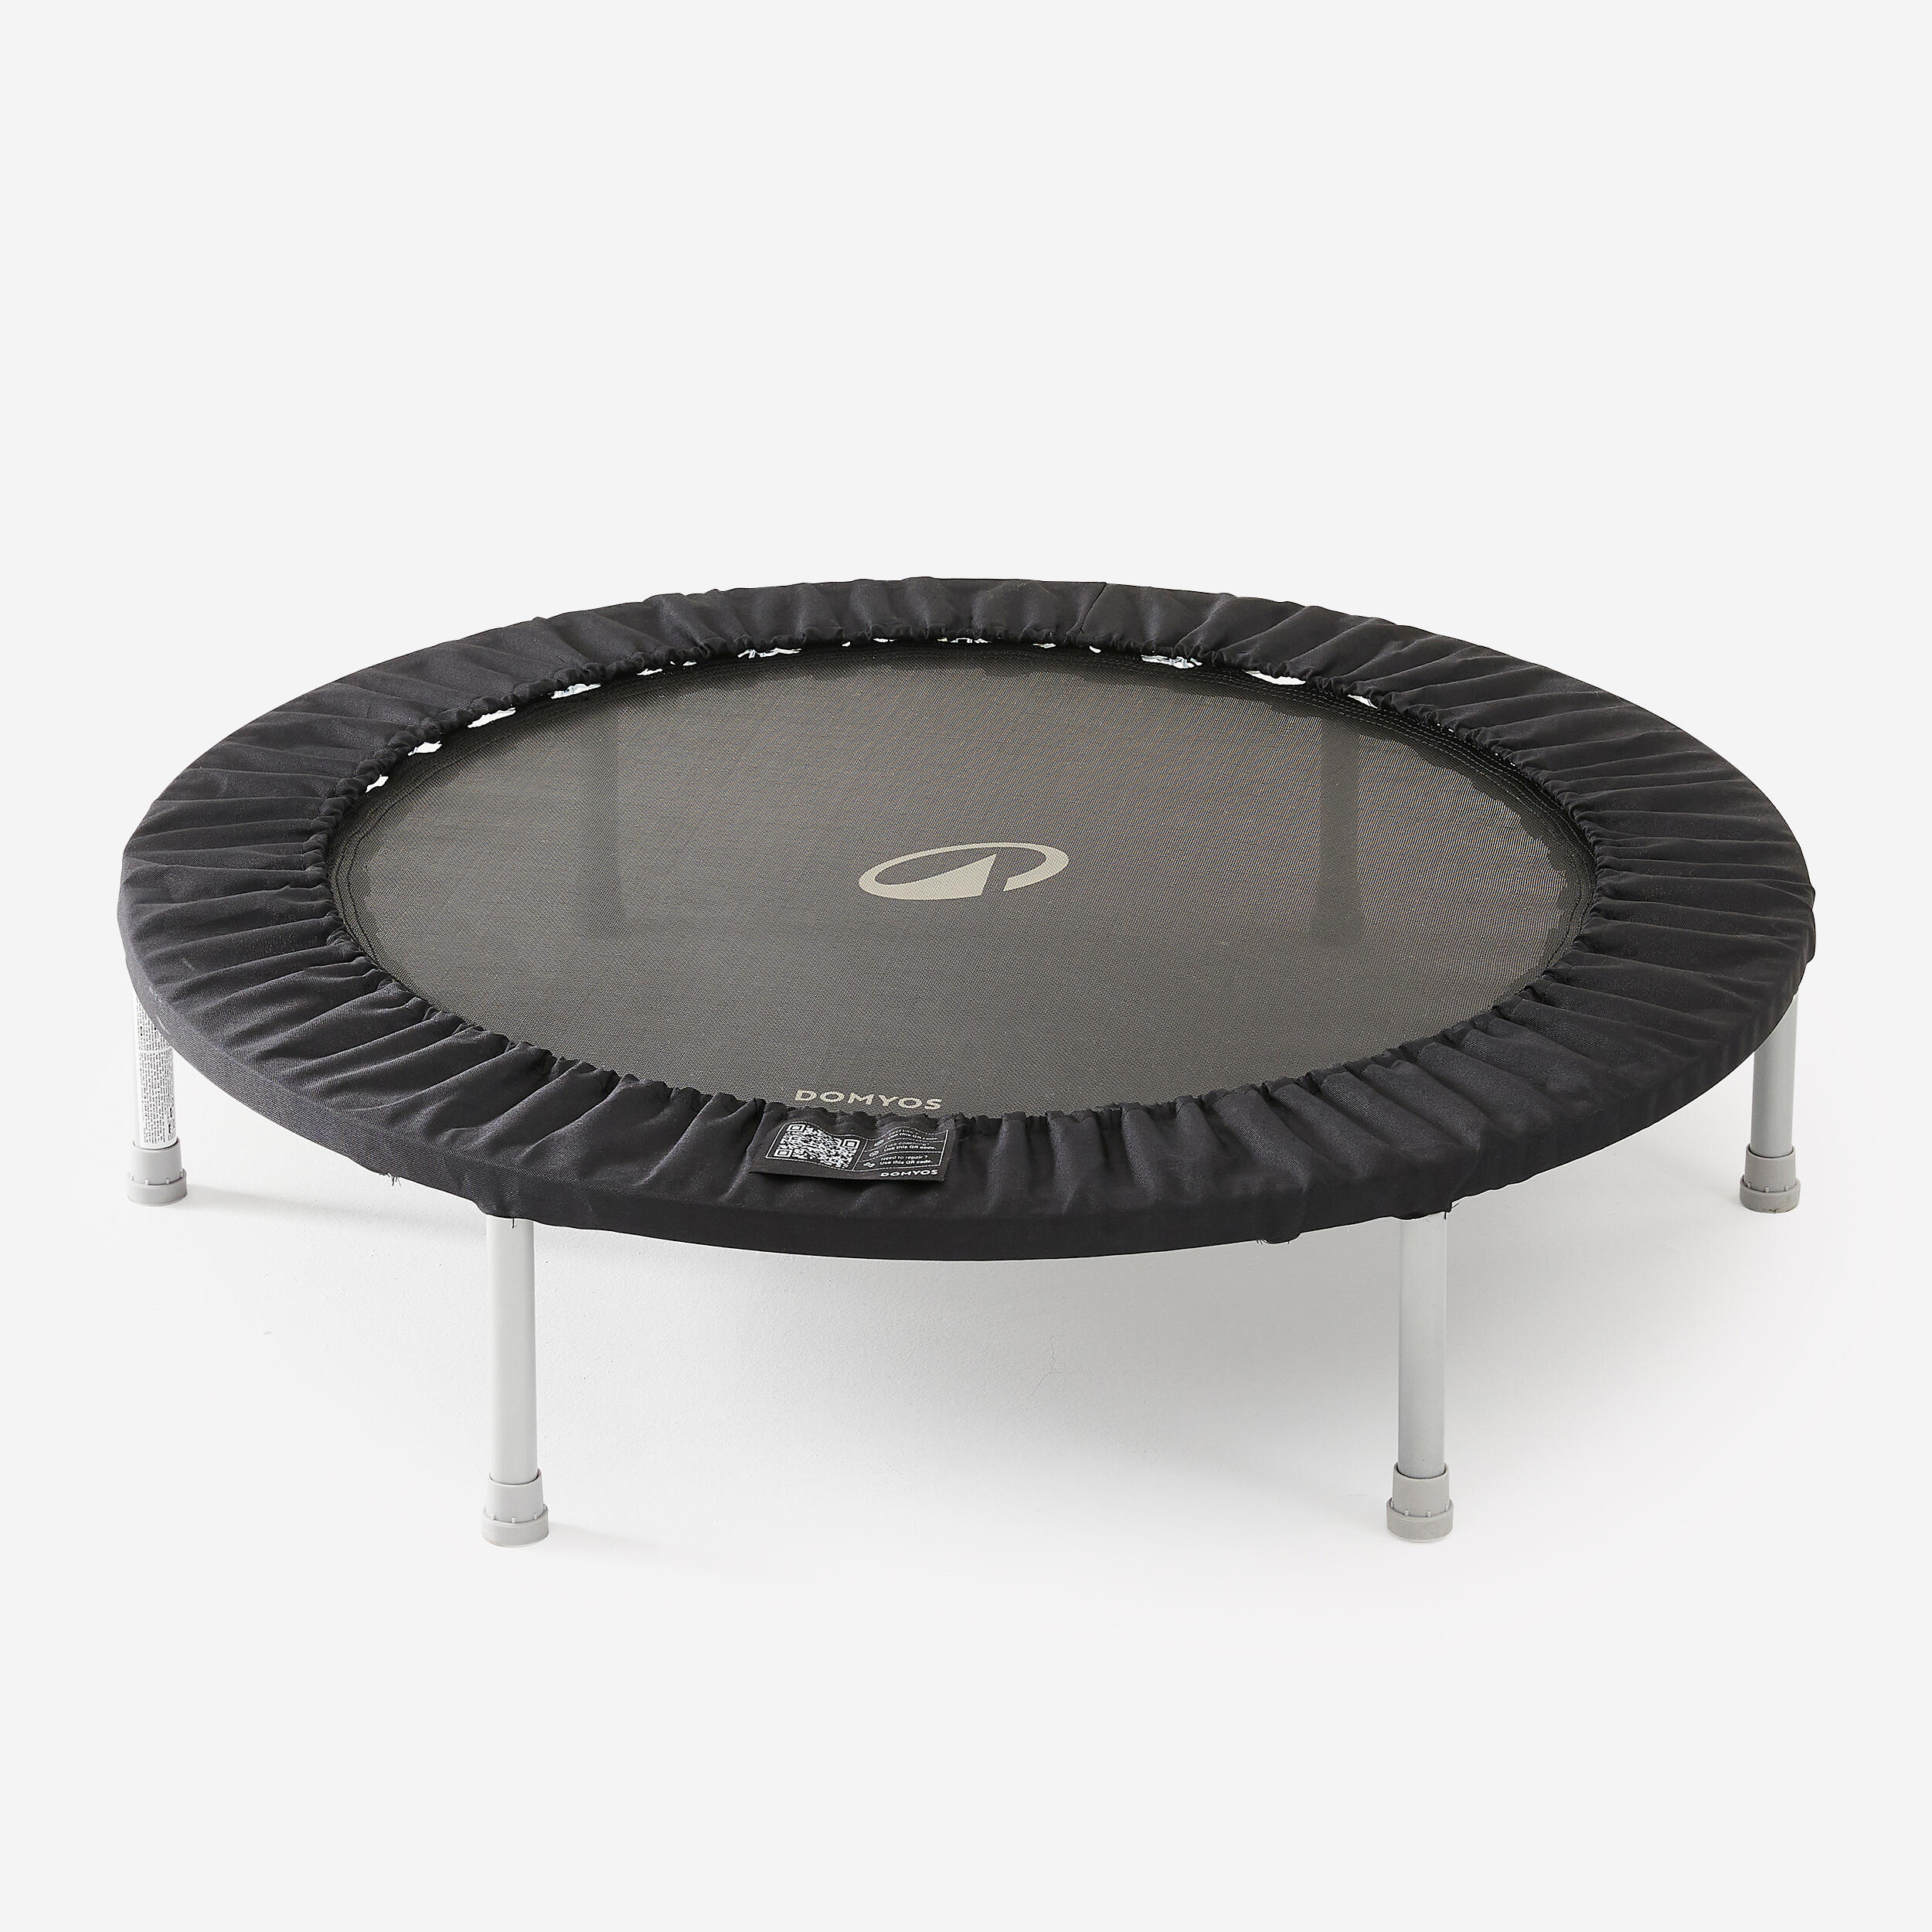 Fitness Trampoline - Fit Trampo 100